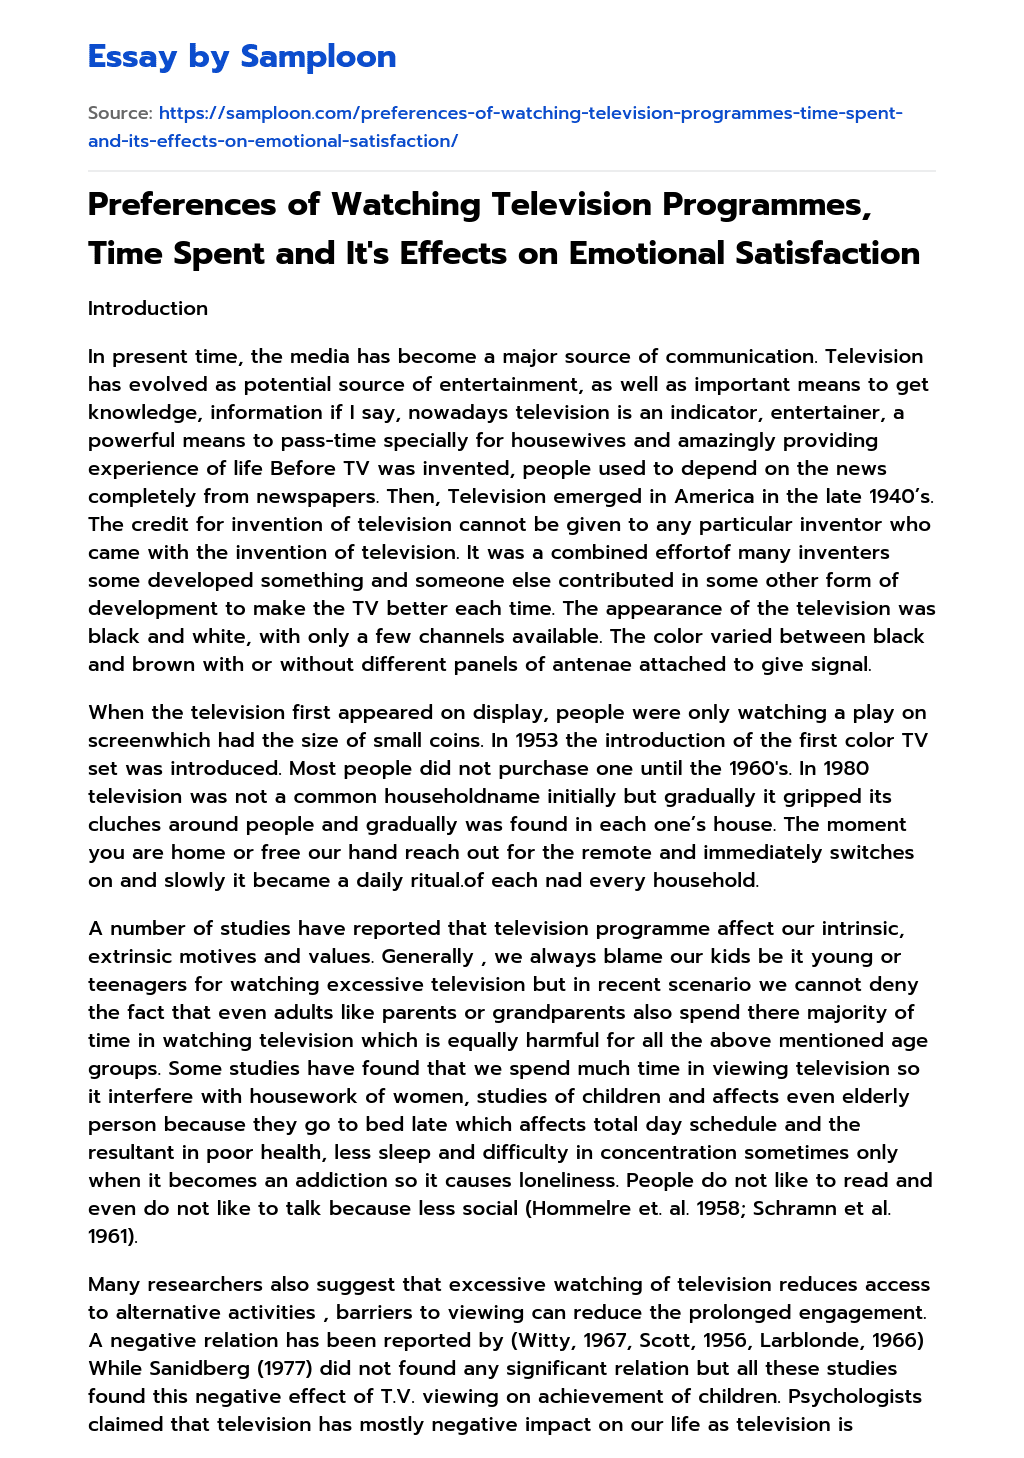 Preferences of Watching Television Programmes, Time Spent and It’s Effects on Emotional Satisfaction essay